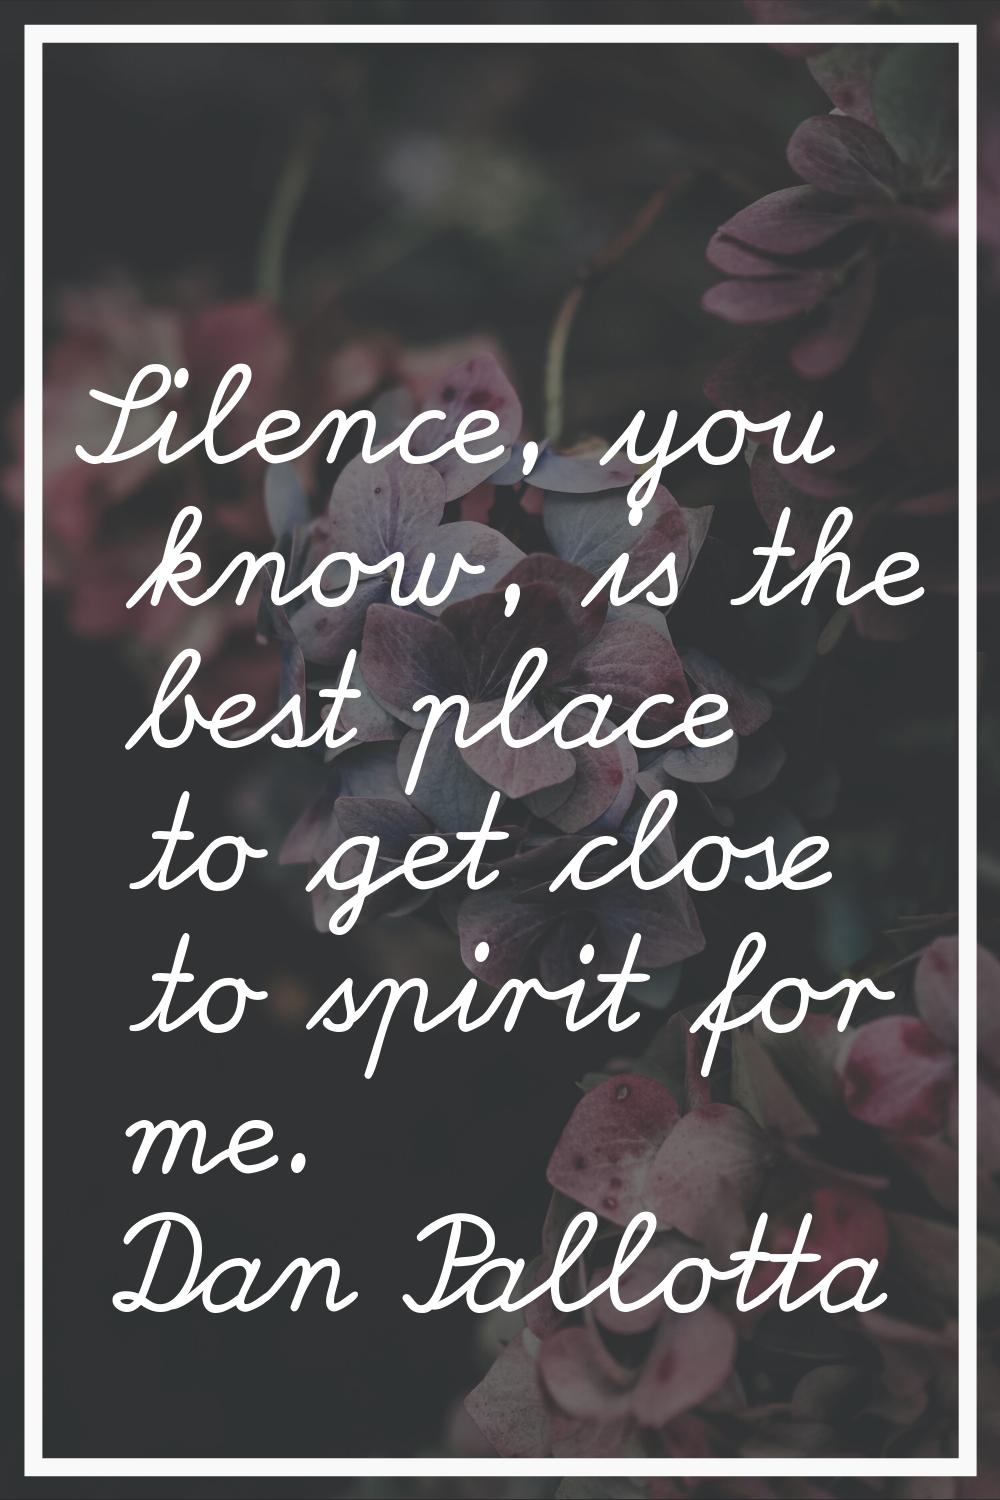 Silence, you know, is the best place to get close to spirit for me.